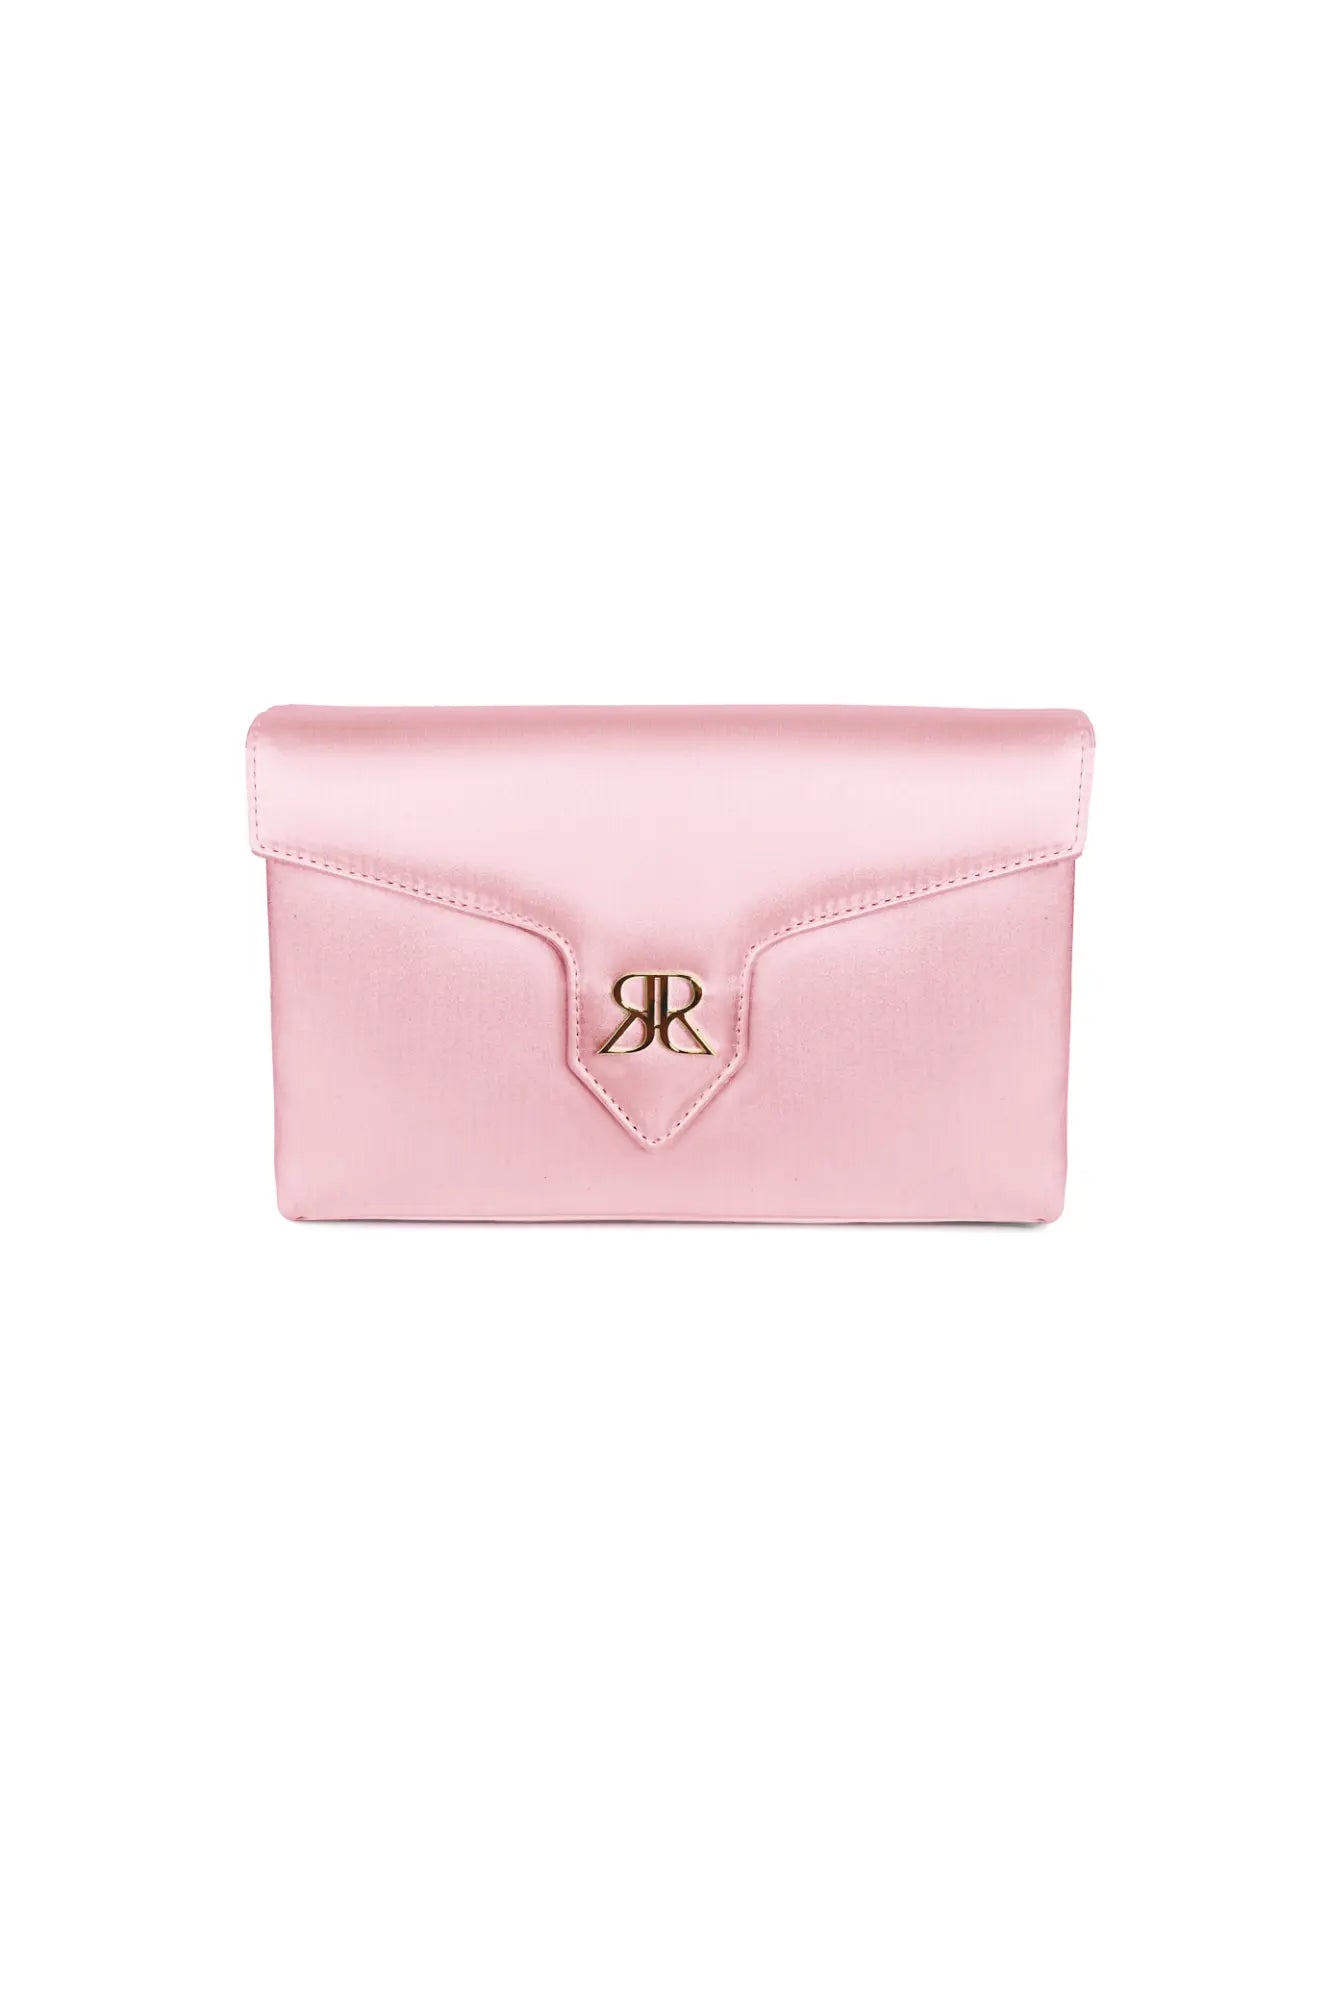 Love Note Envelope Clutch Pink Sky from The Bella Rosa Collection with a branded metallic closure on a white background.